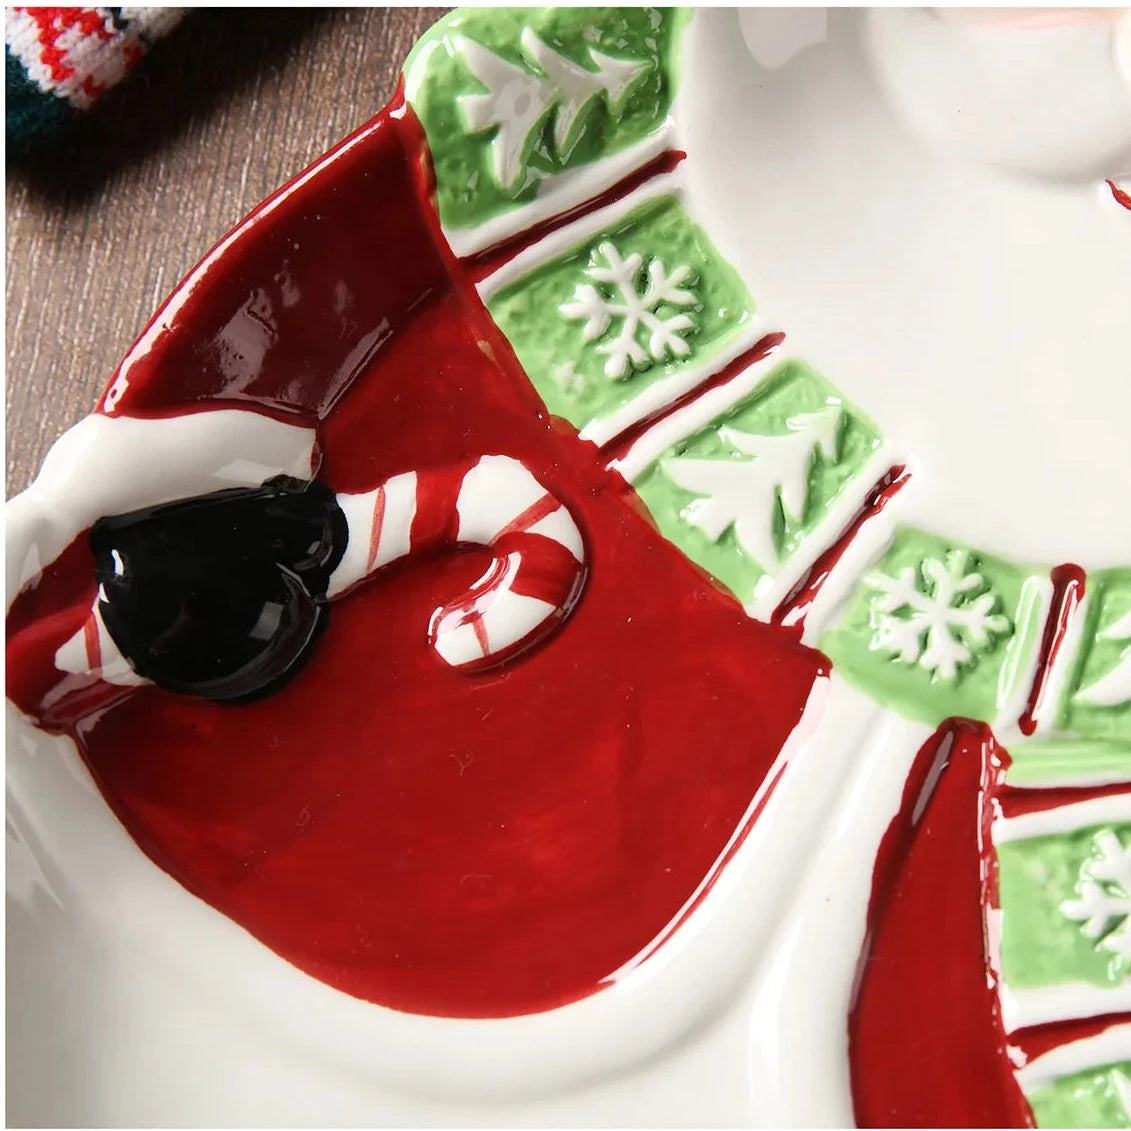 3D Hand-Painted Christmas Plates